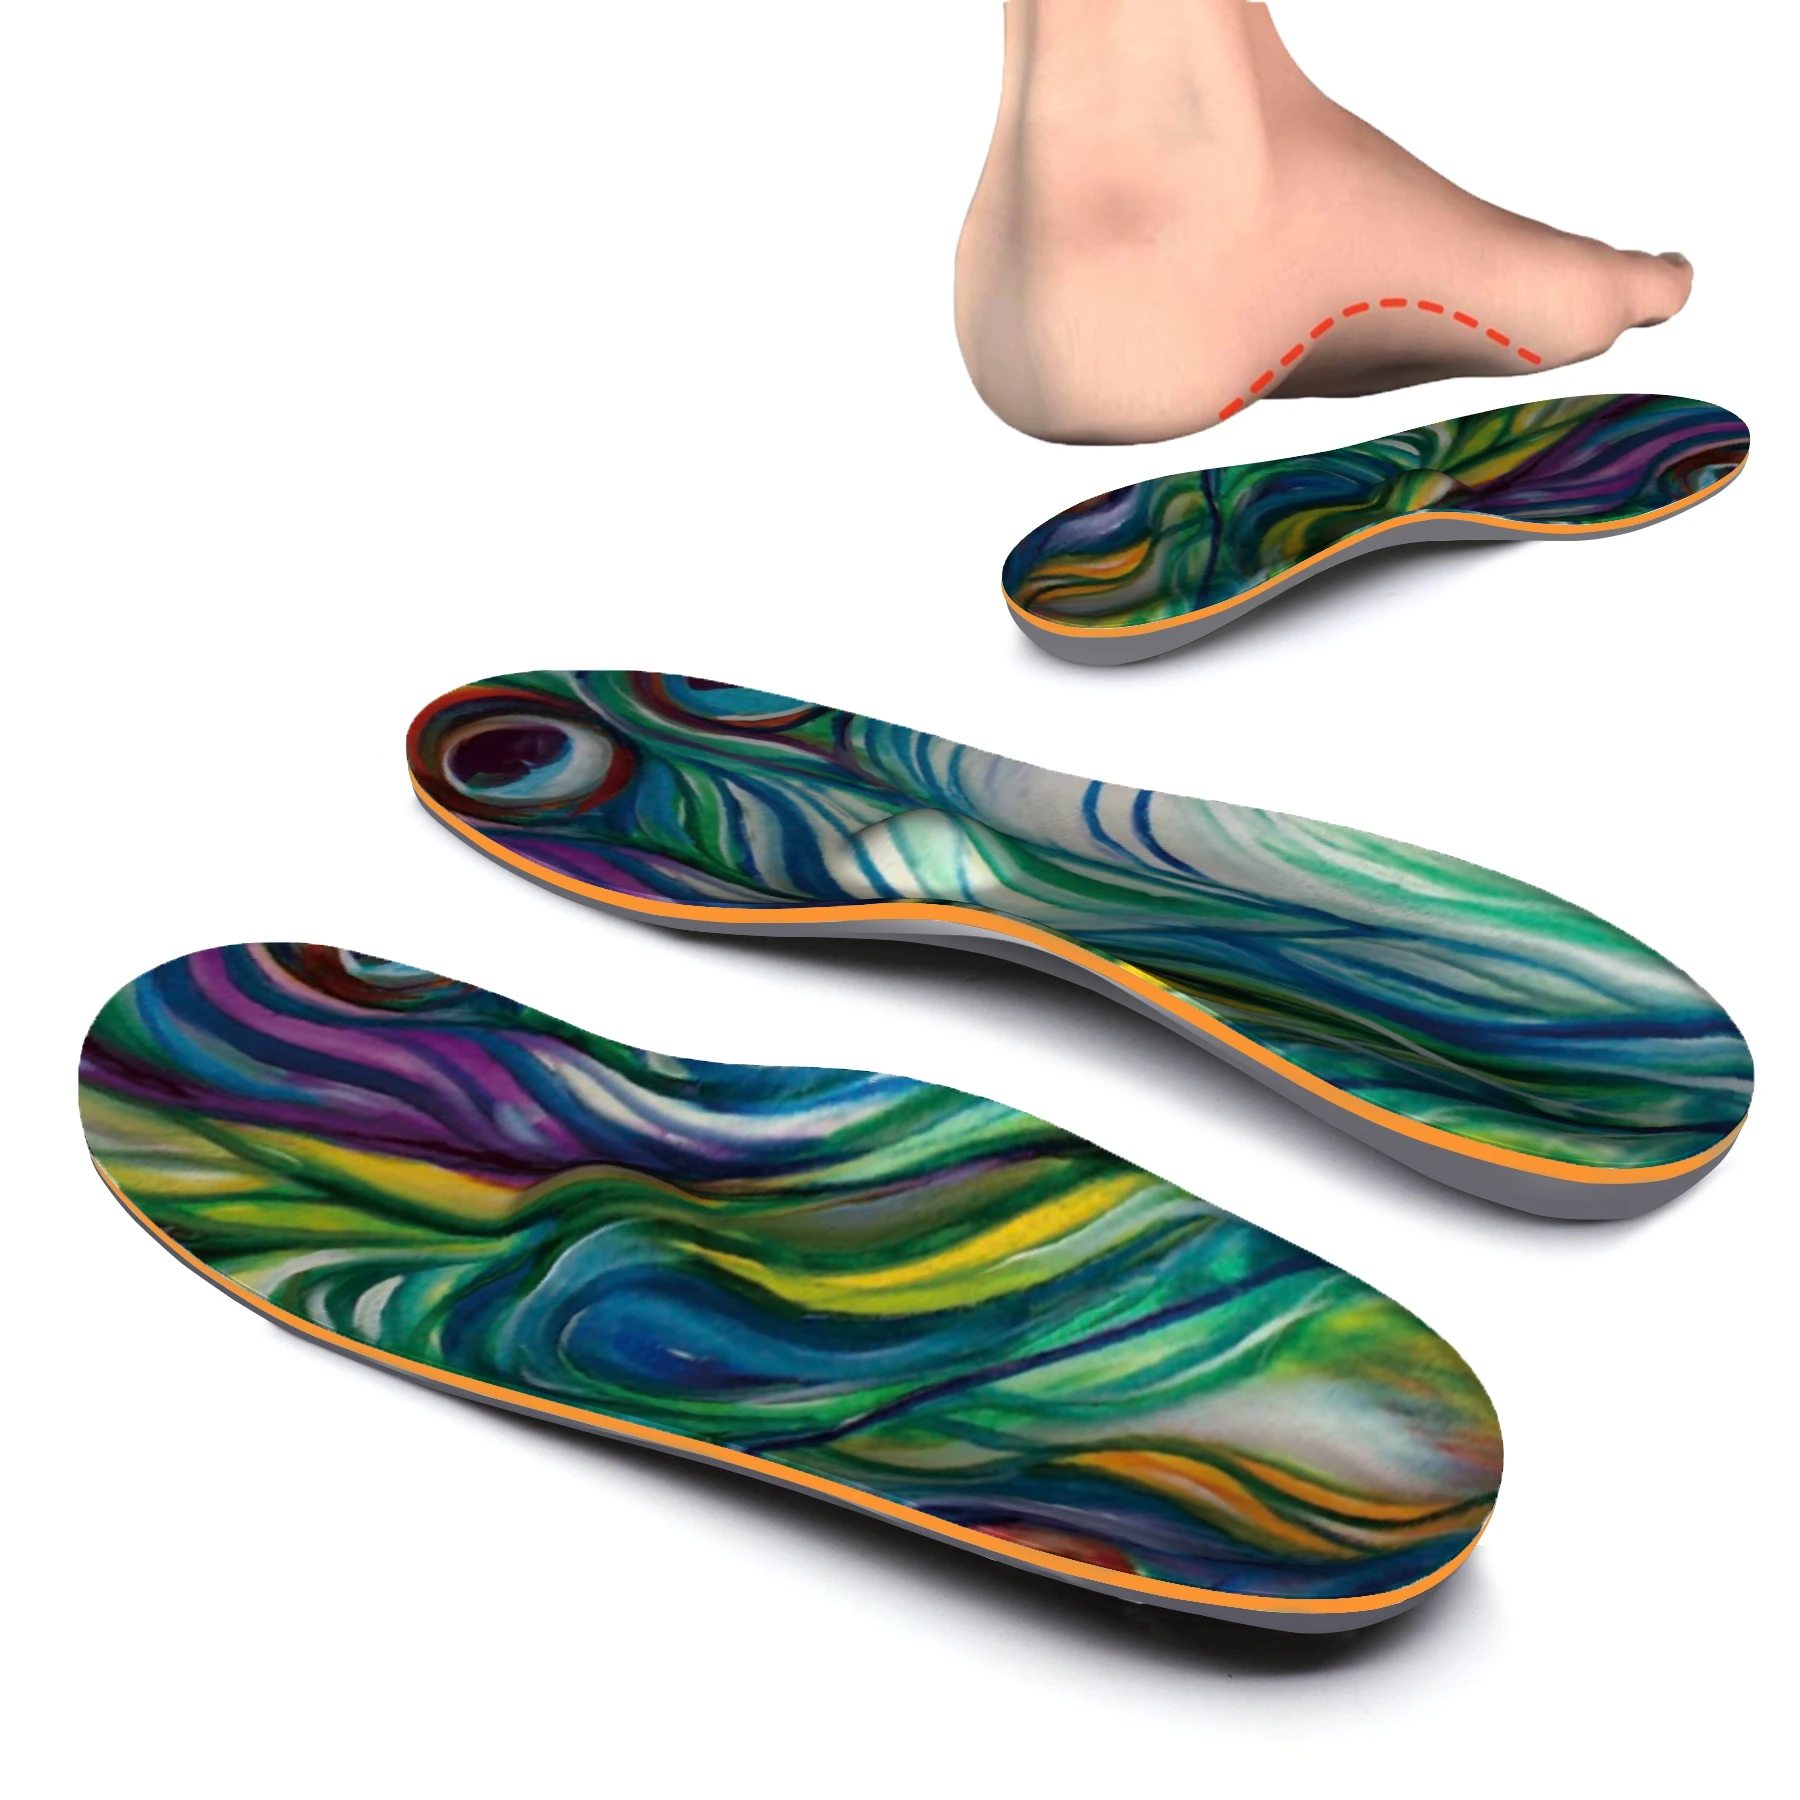 Colorful Designed Plantar Fasciitis Feet Insoles Arch Supports Orthotics Inserts Flat Feet, High Arch, Foot Pain Relief